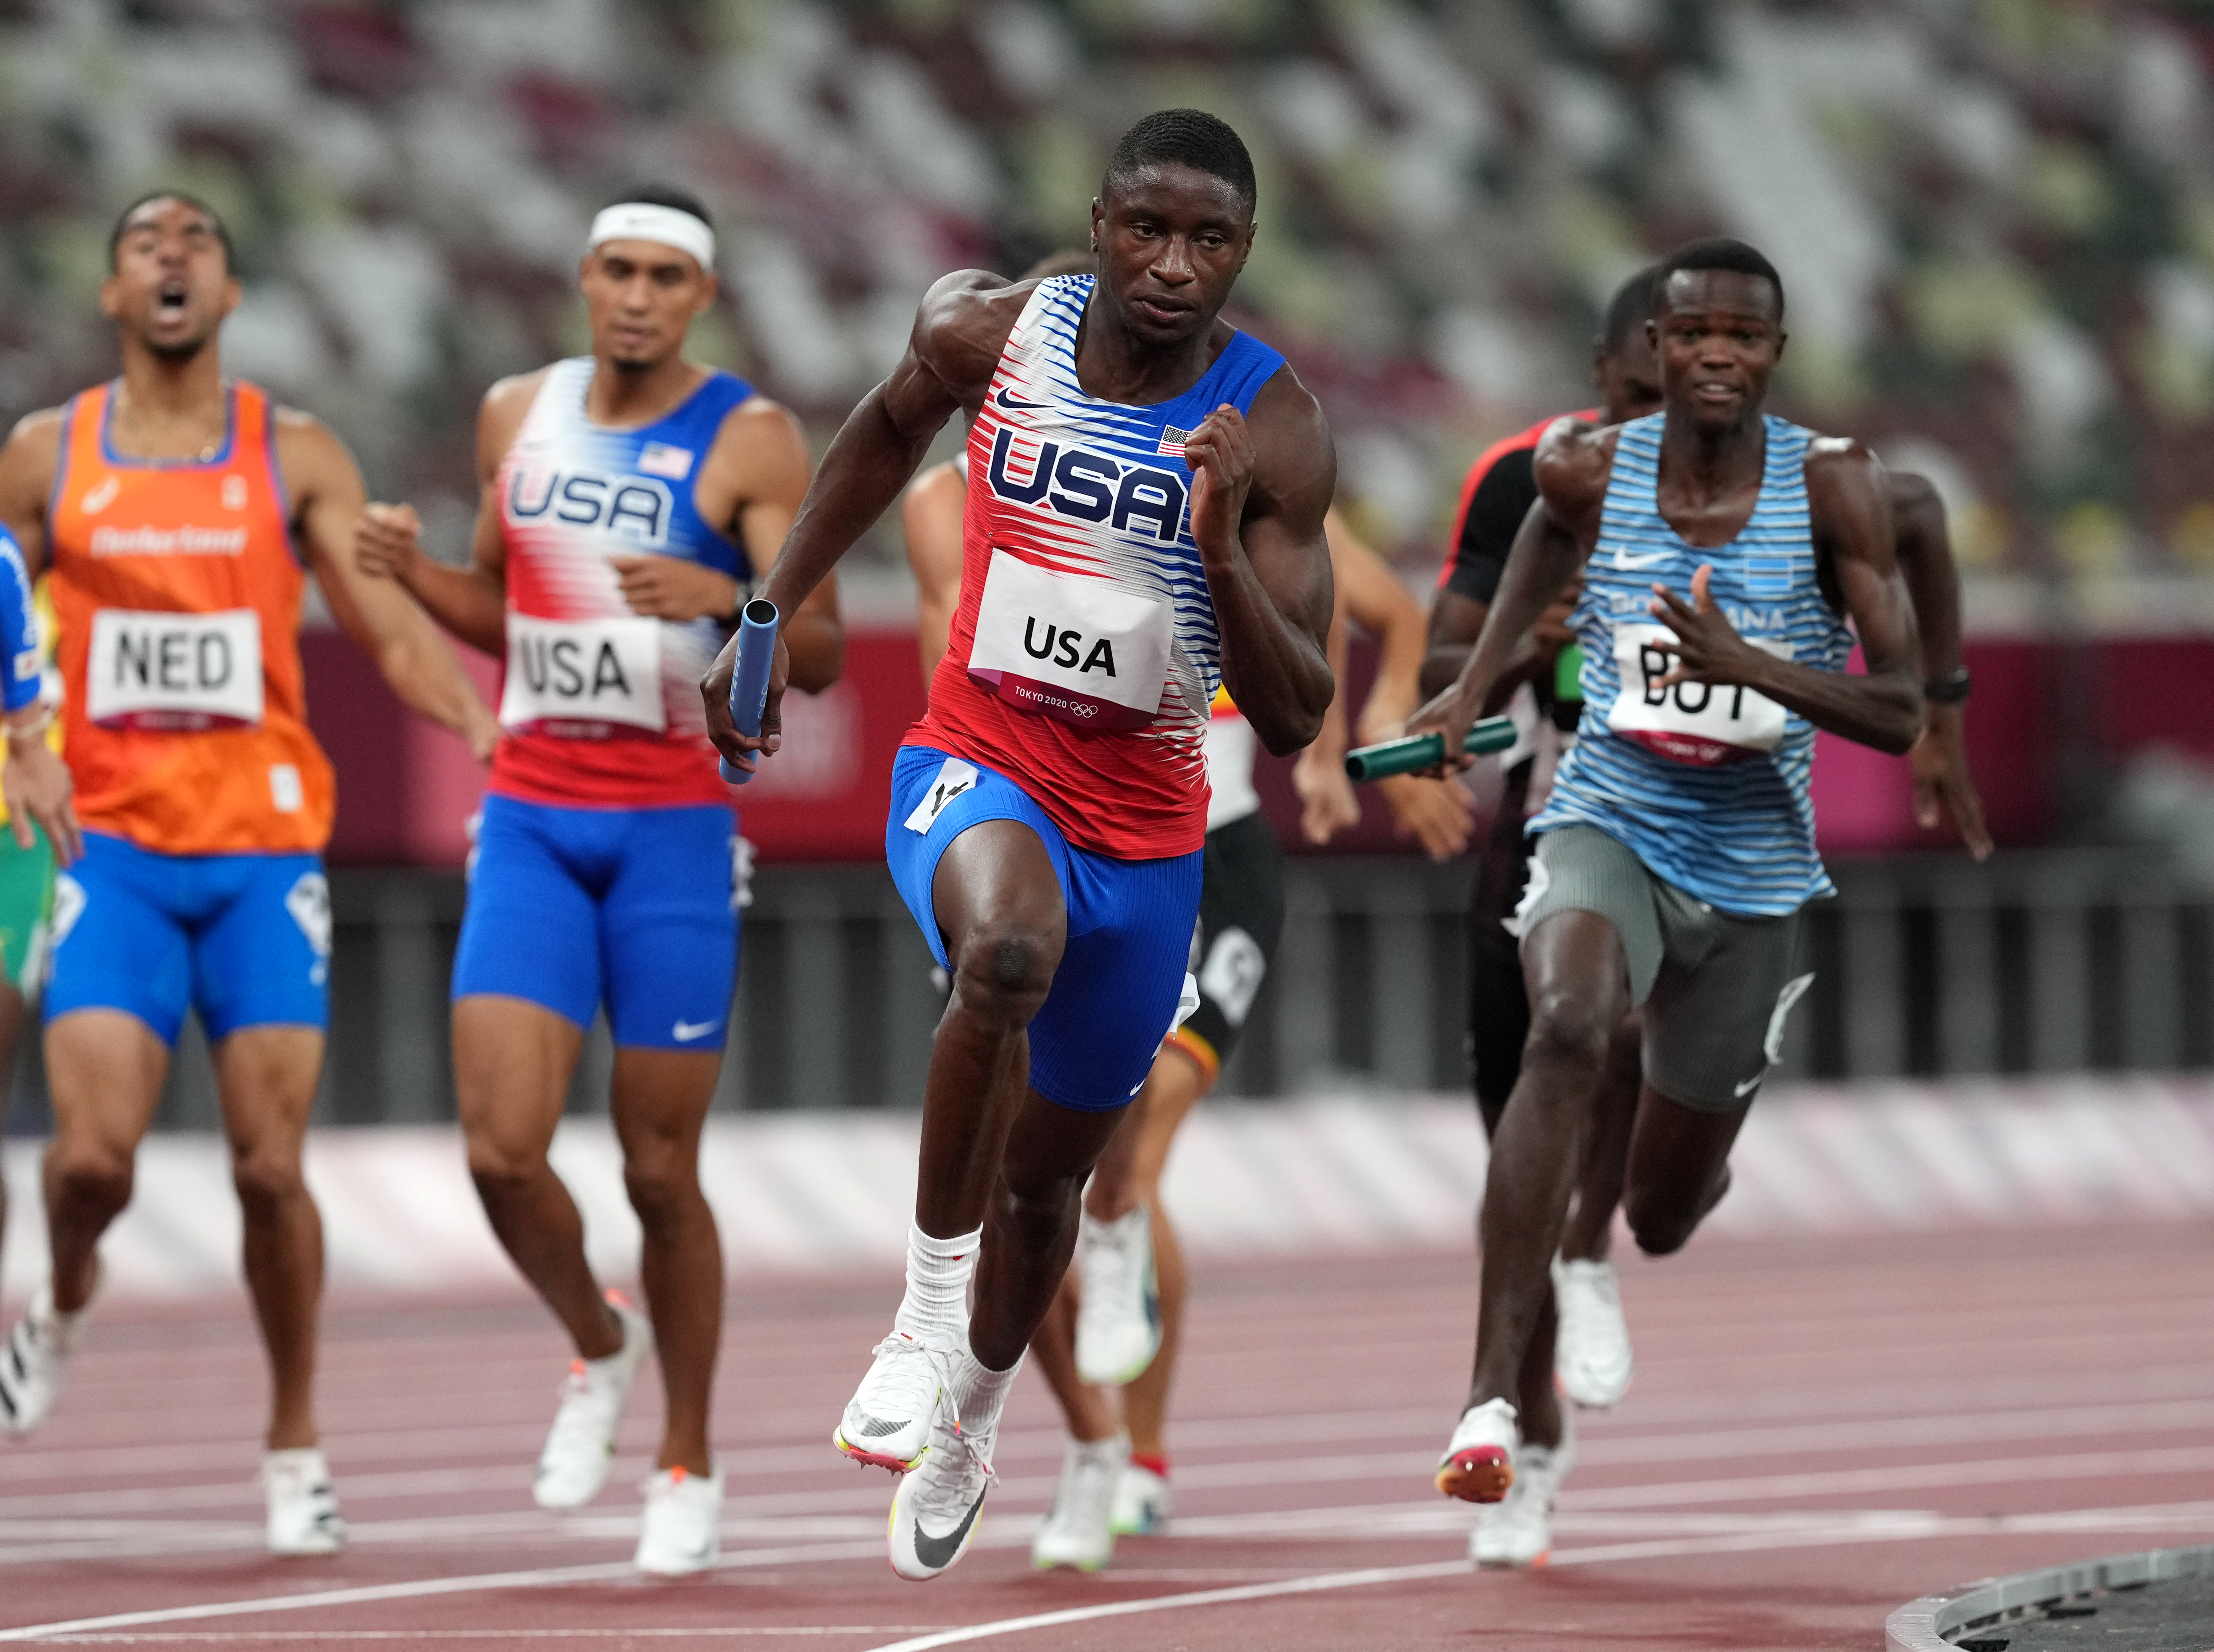 USA’s Bryce Deadmon during the Men’s 4 x 400m Relay at the Olympic Stadium on the fifteenth day of the Tokyo 2020 Olympic Games in Japan.